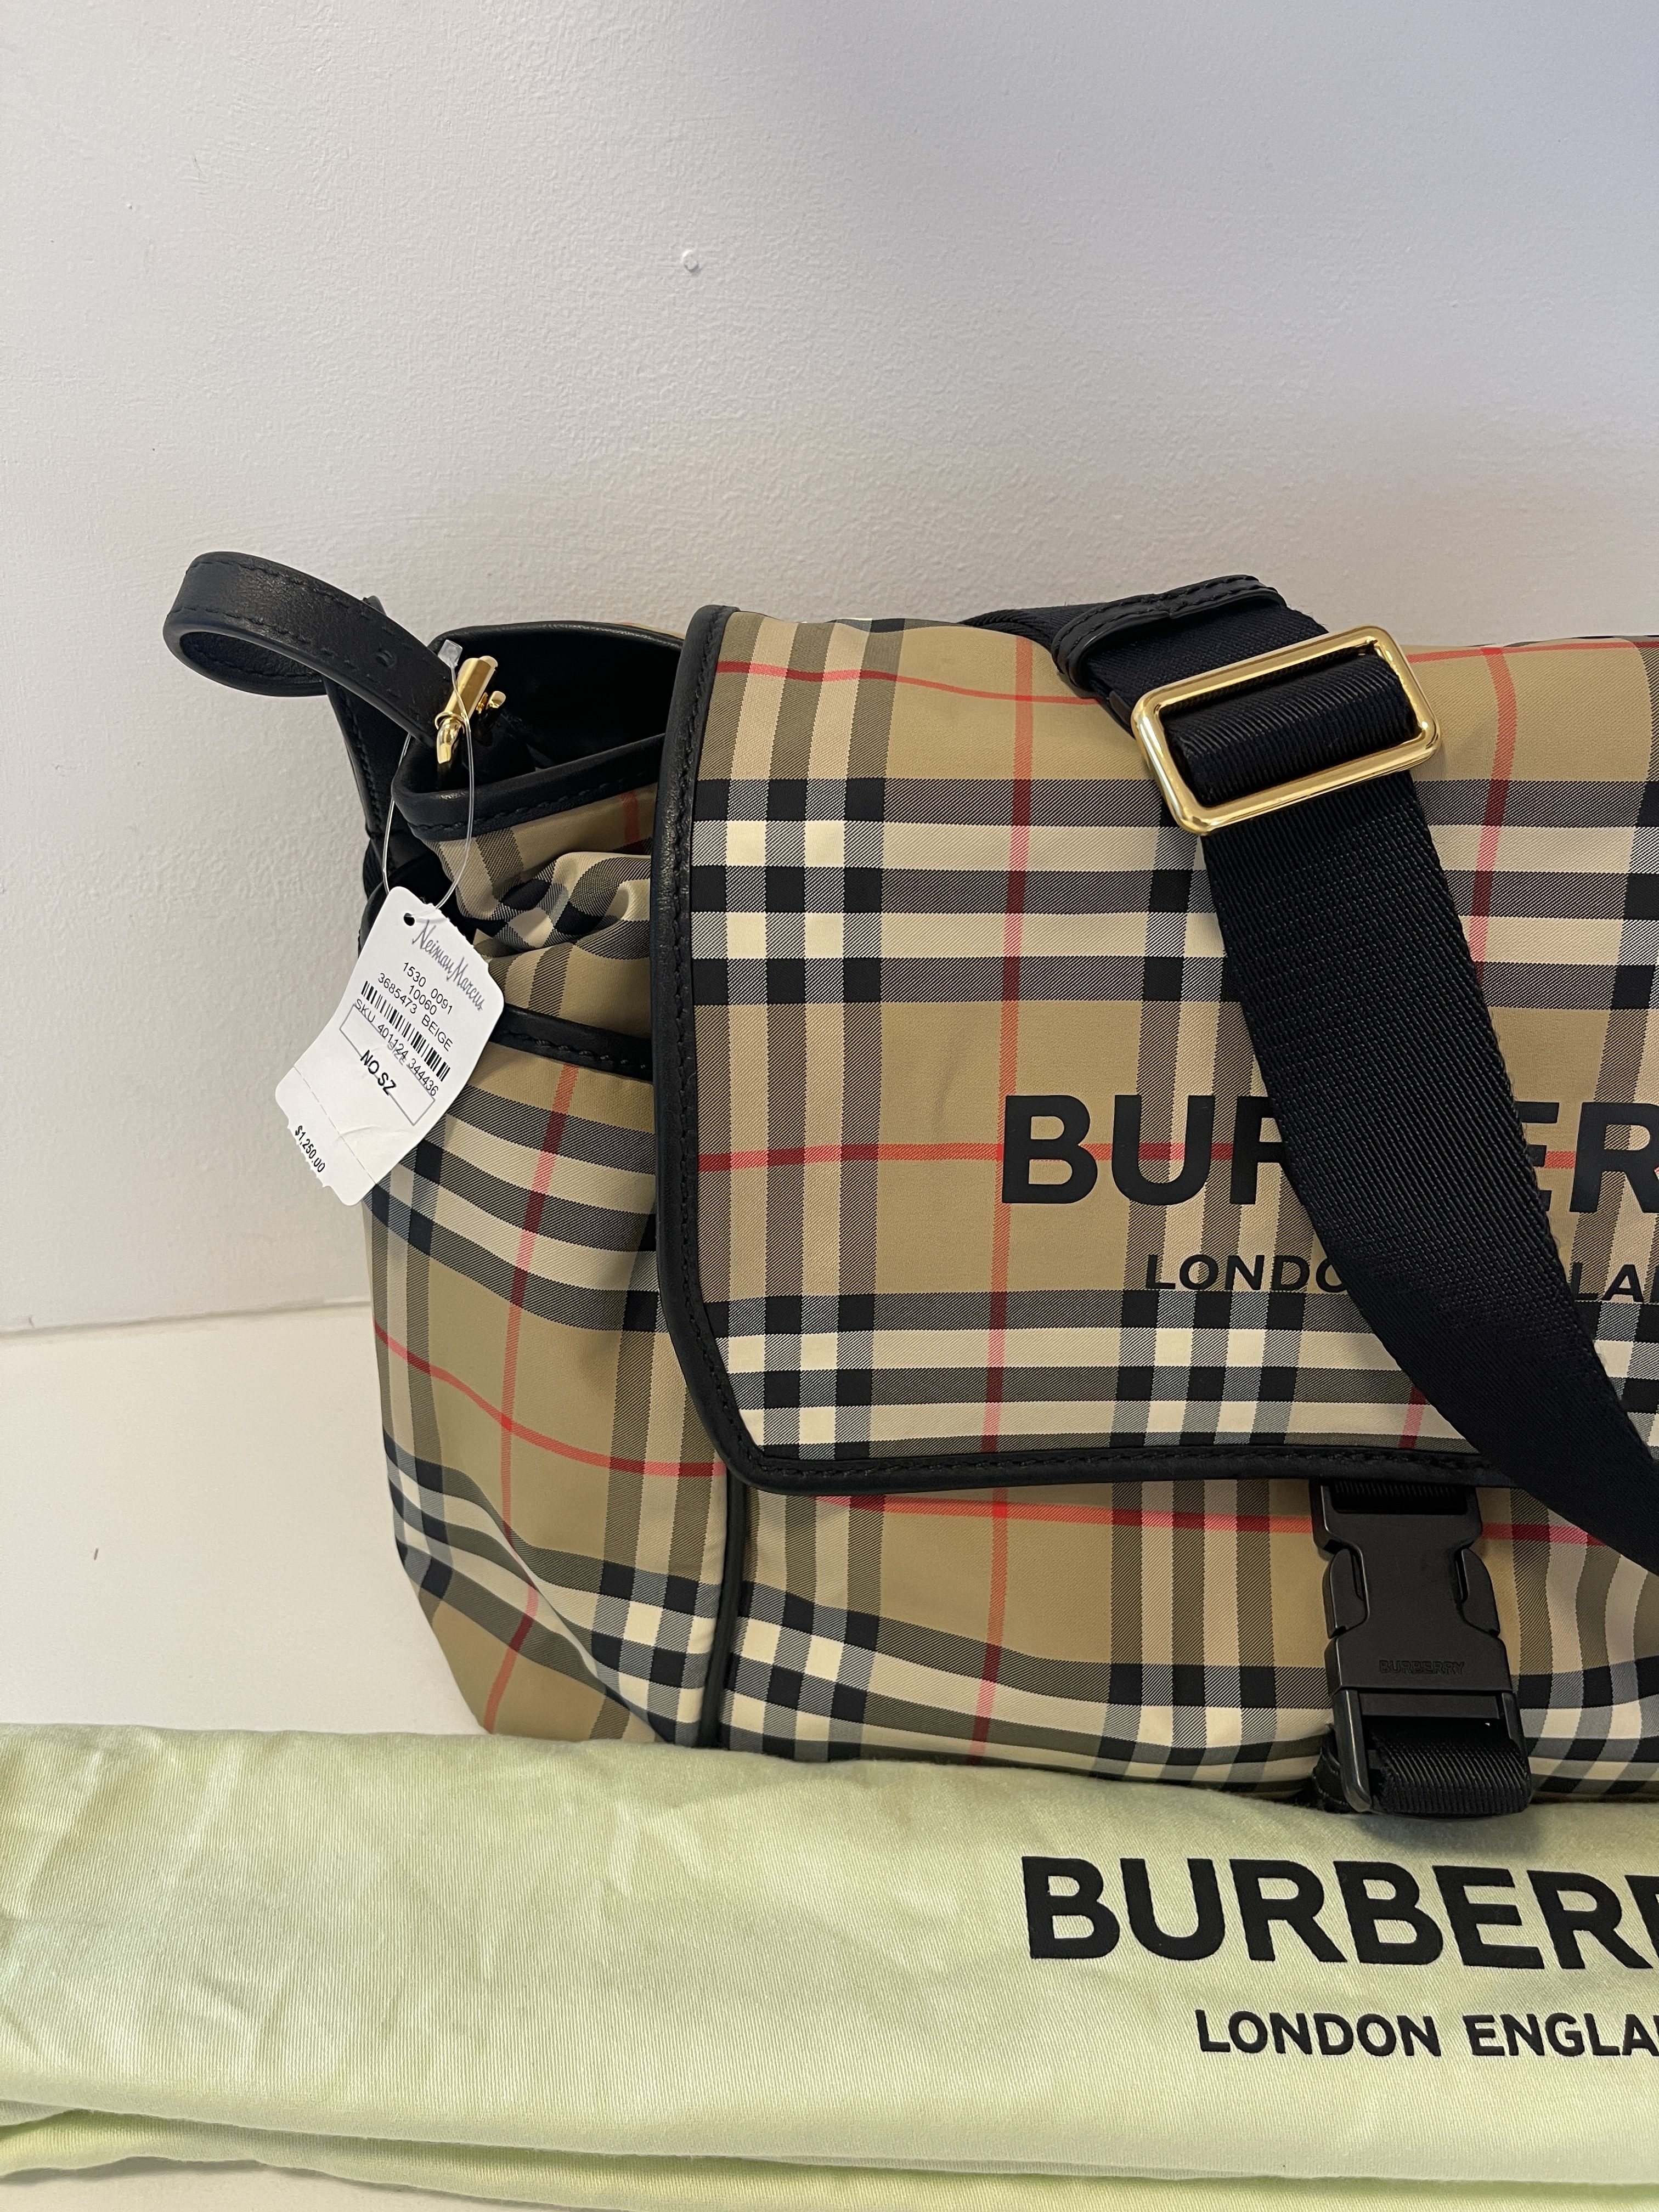 Burberry Diaper Bag Vintage Check for Sale in Los Angeles, CA - OfferUp